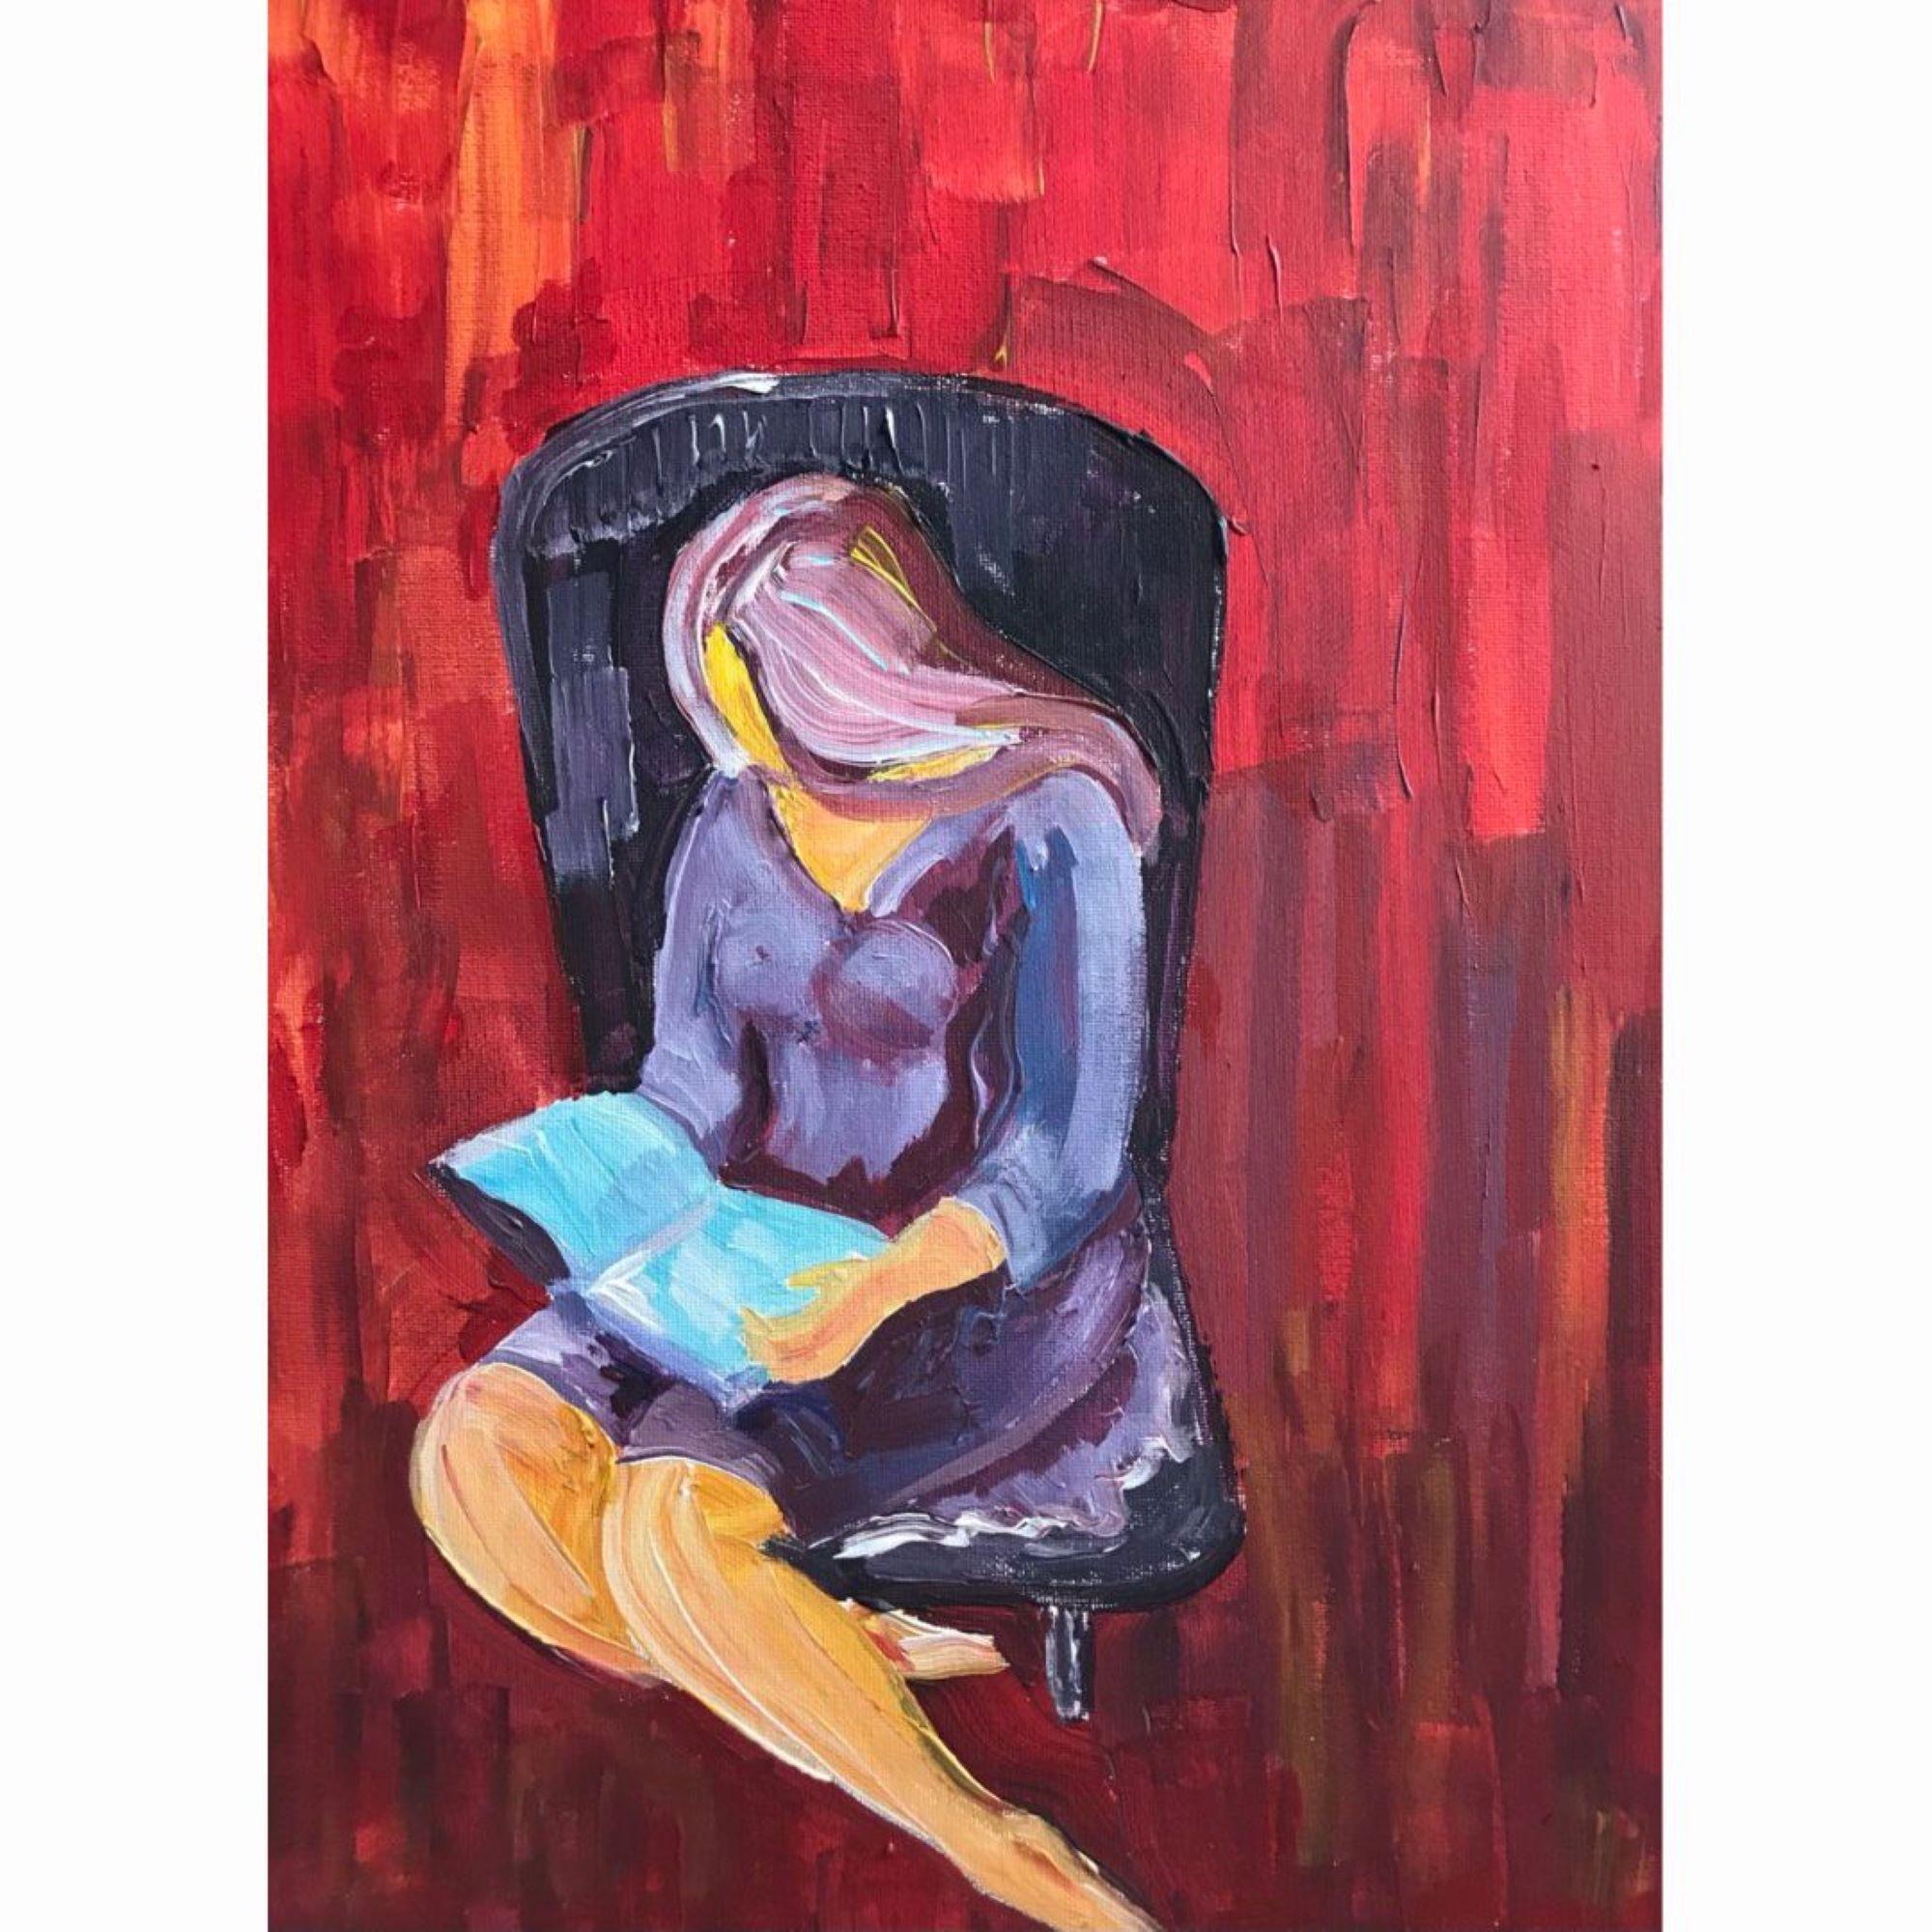 Tetiana Pchelnykova Figurative Painting - Black chair, "The Joy Series: A Journey to Inner Happiness" series 